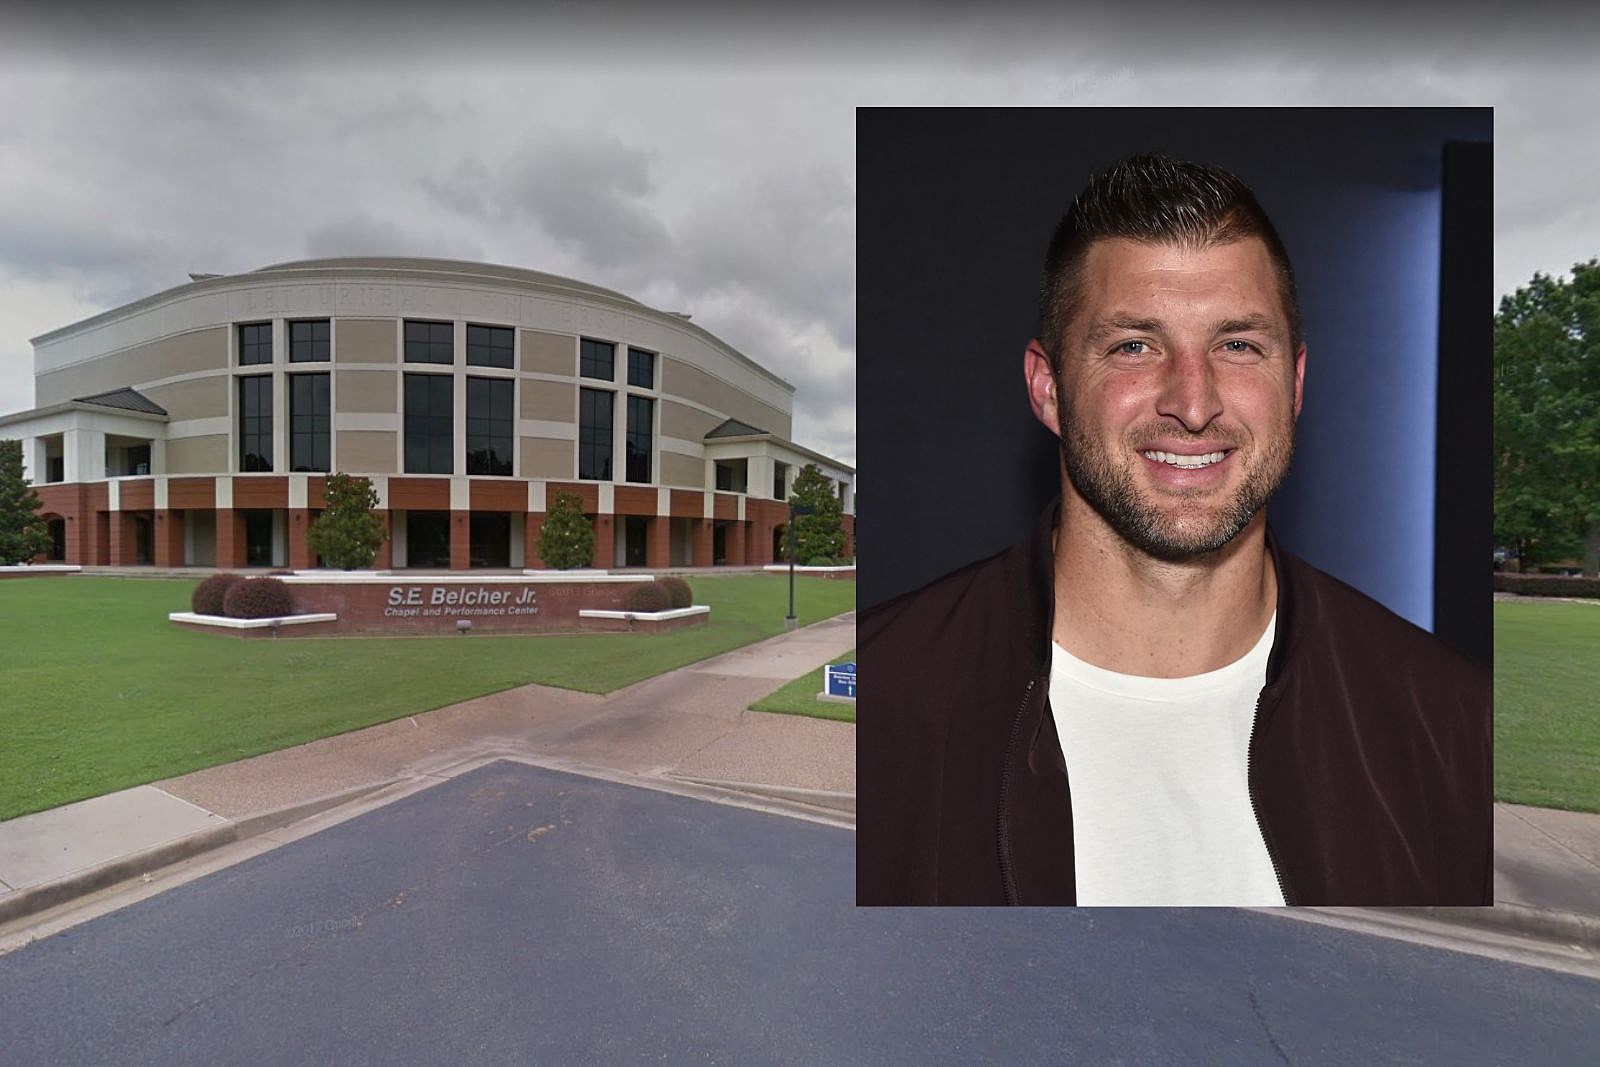 Here is a photo of Tim Tebow running directly into a wall in his